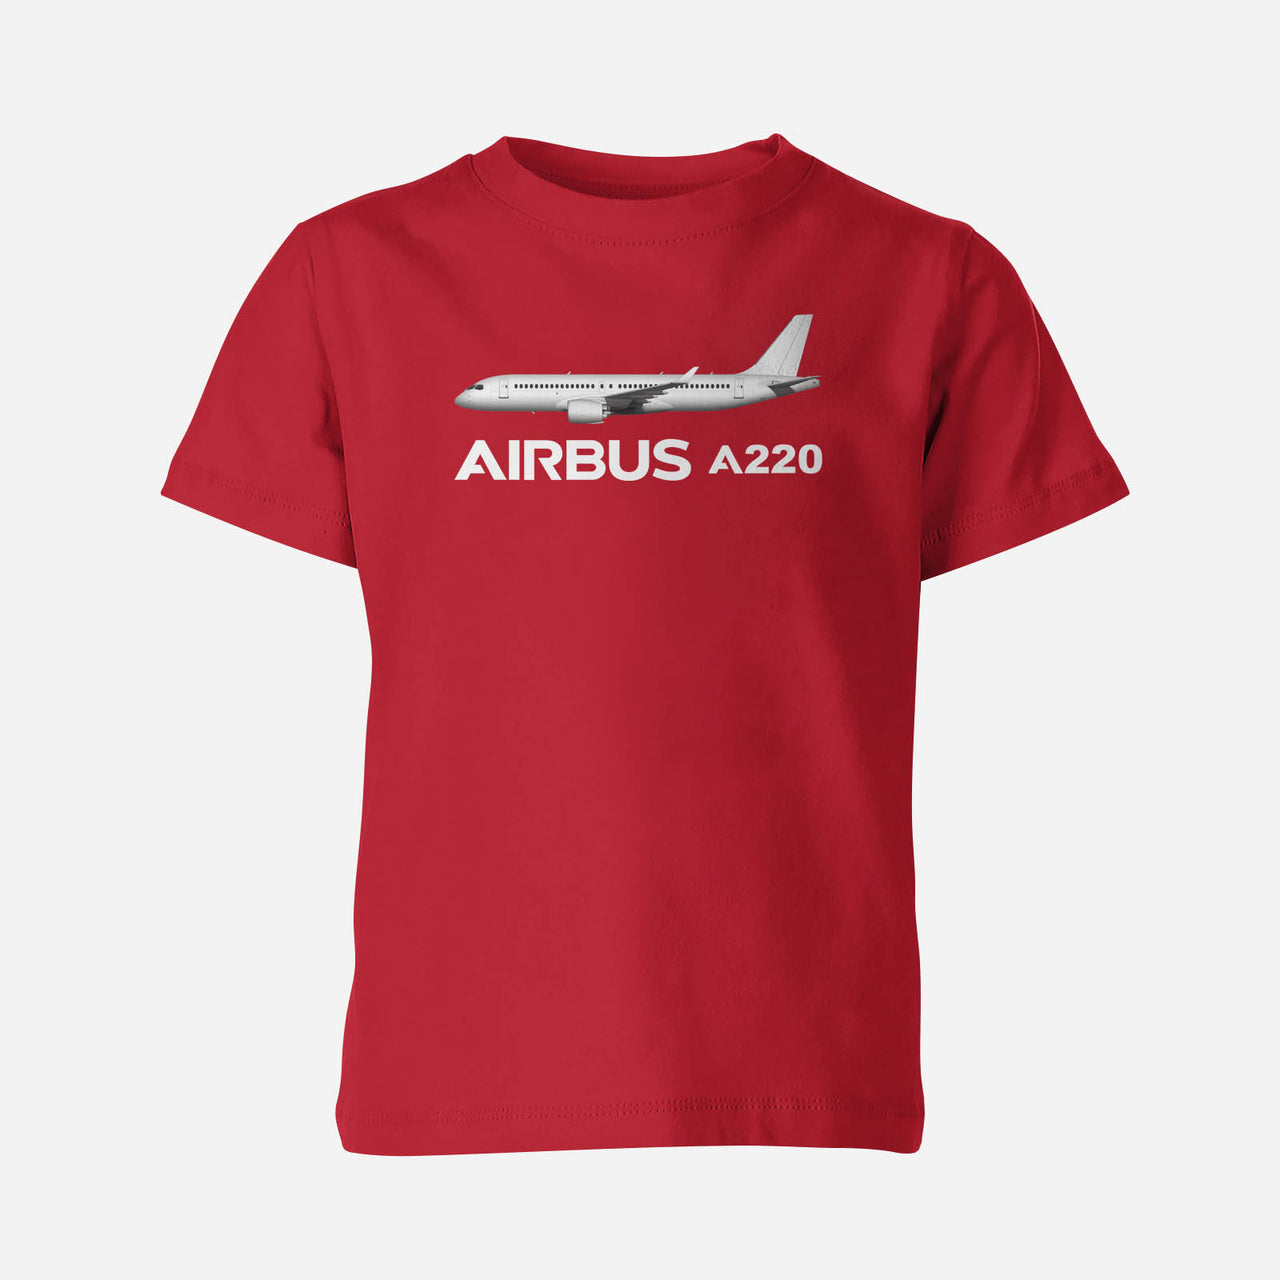 The Airbus A220 Designed Children T-Shirts